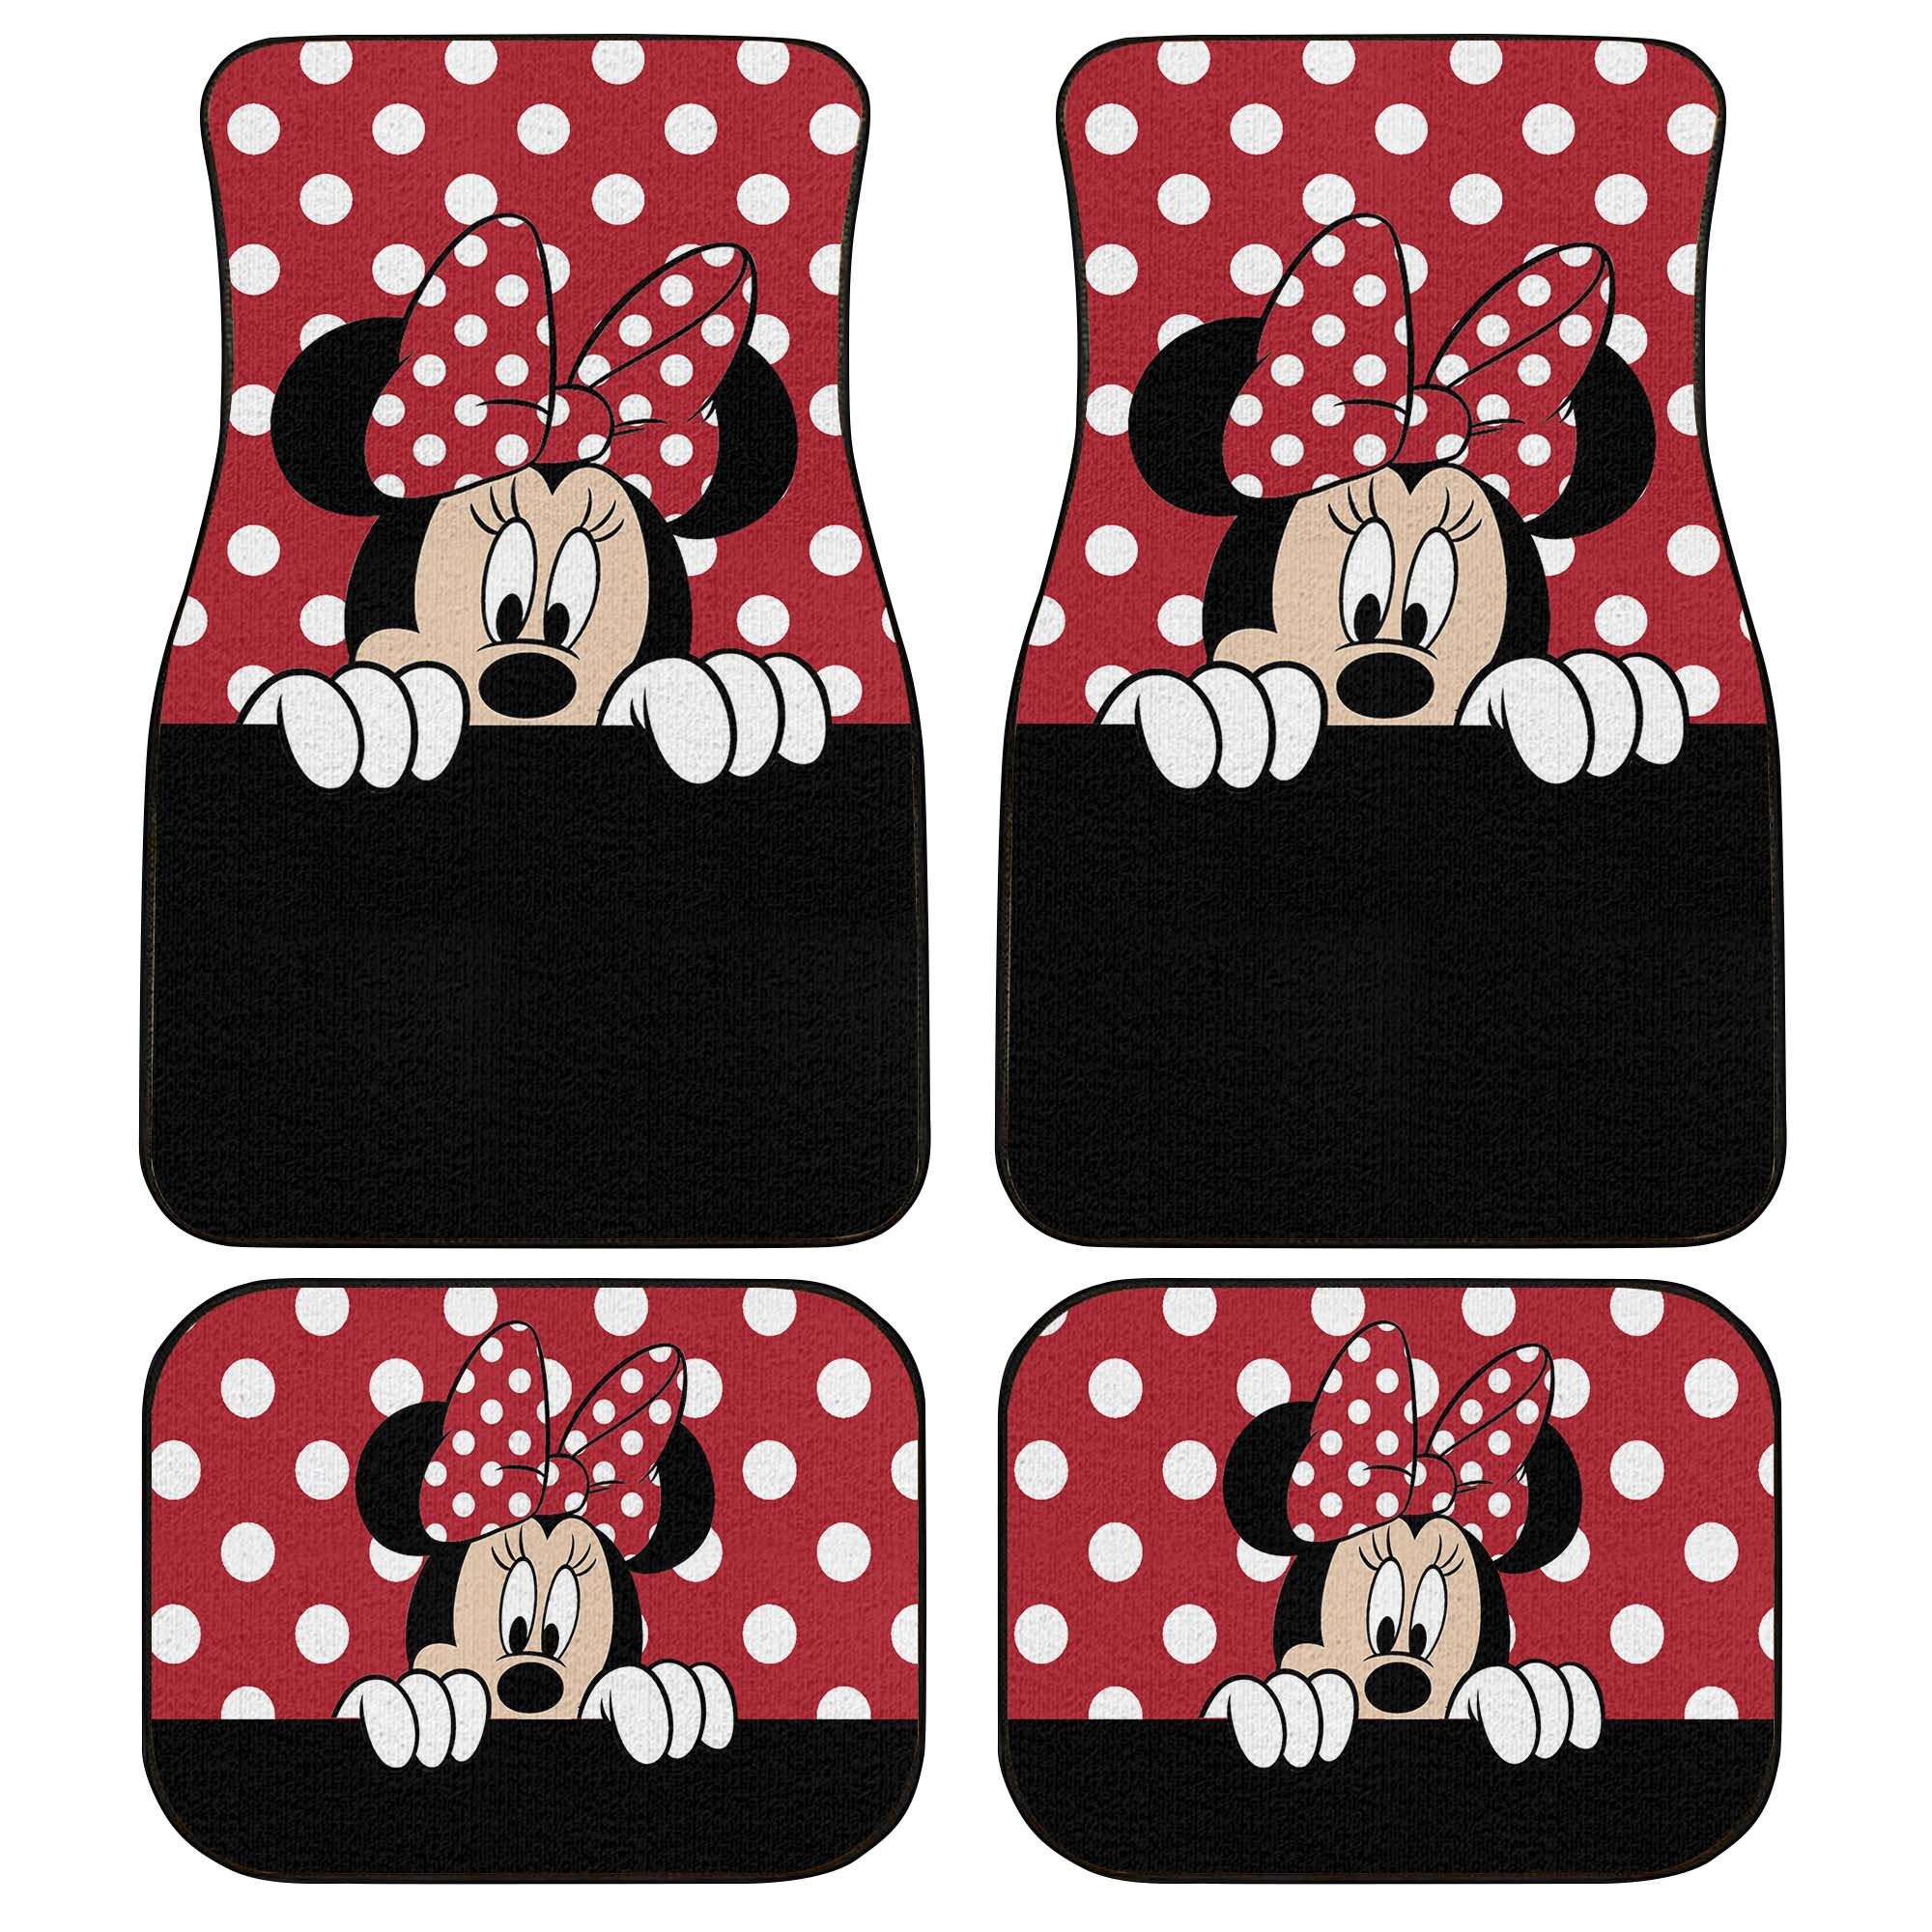 Minnie Mouse Polkadot Patterns Red Black White Disney Graphic Cartoon Custom Personalized Car Floor Mat Set Accessories Decorations